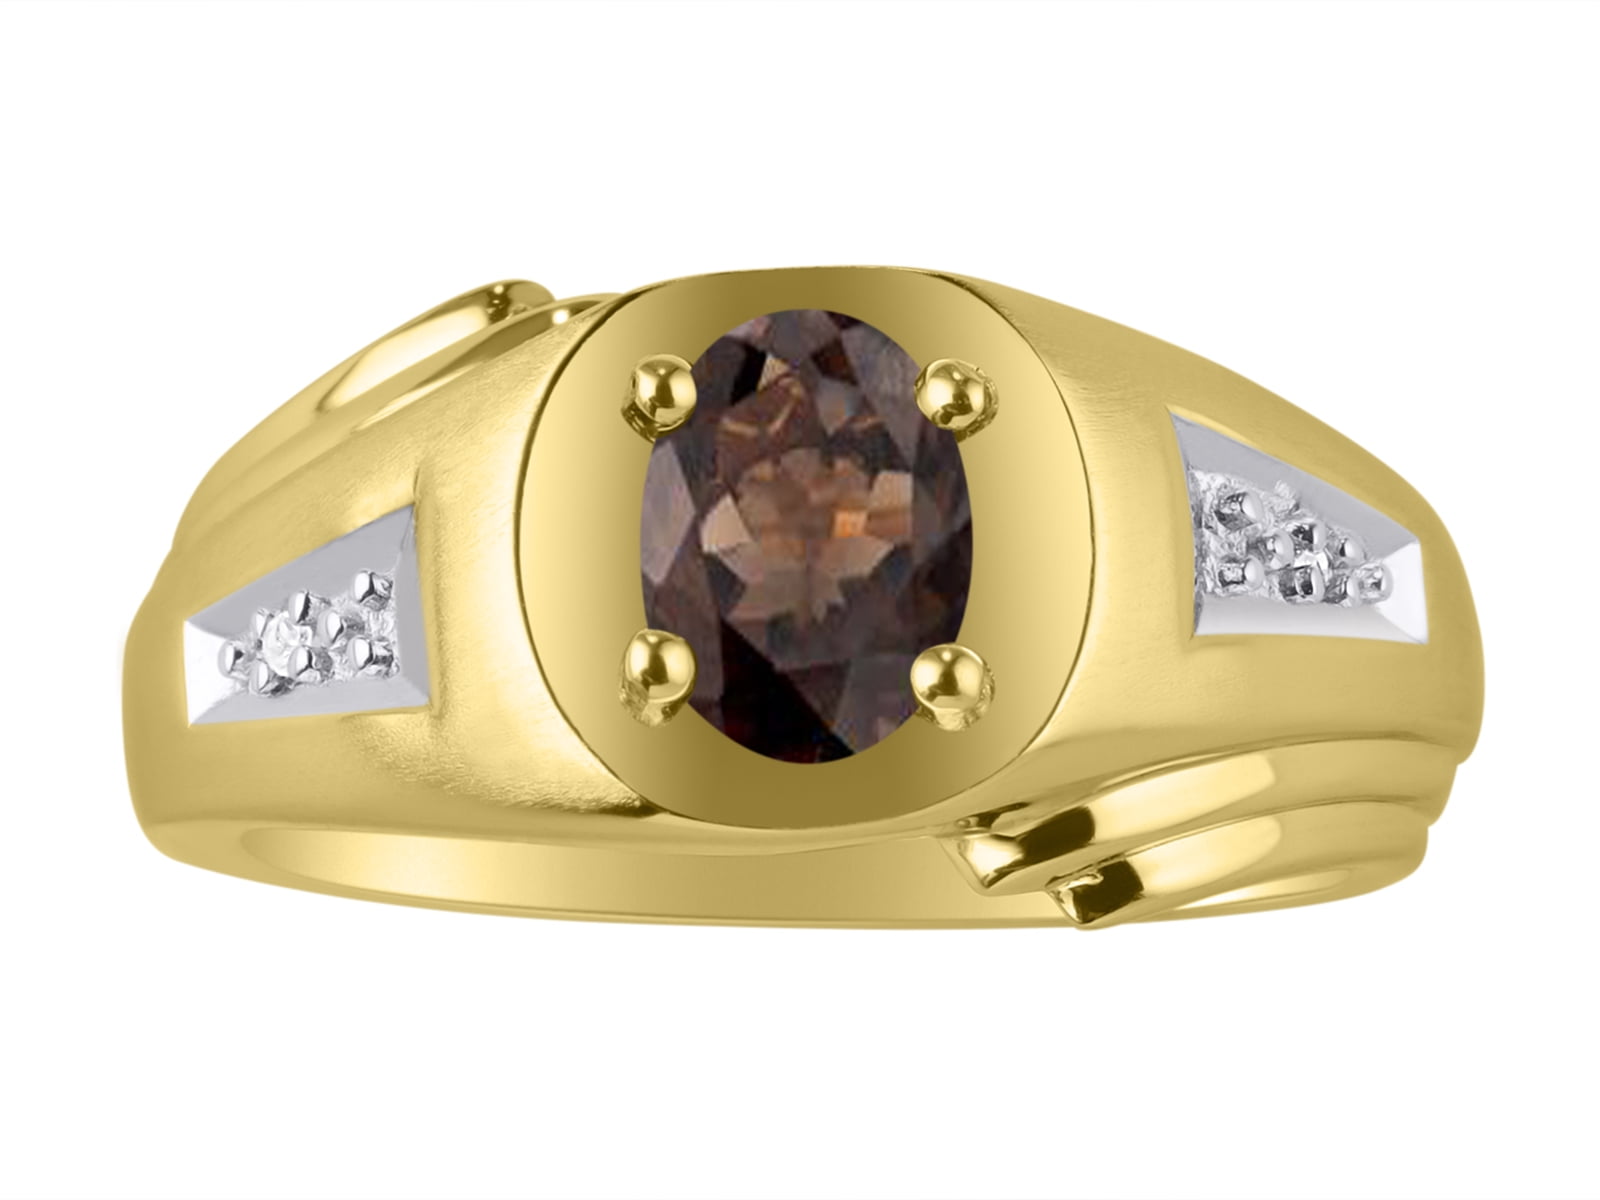 RYLOS Mens Ring with Oval Shape Gemstone & Genuine Sparkling Diamonds in 14K Yellow Gold Plated Silver .925-9X7MM Color Stone